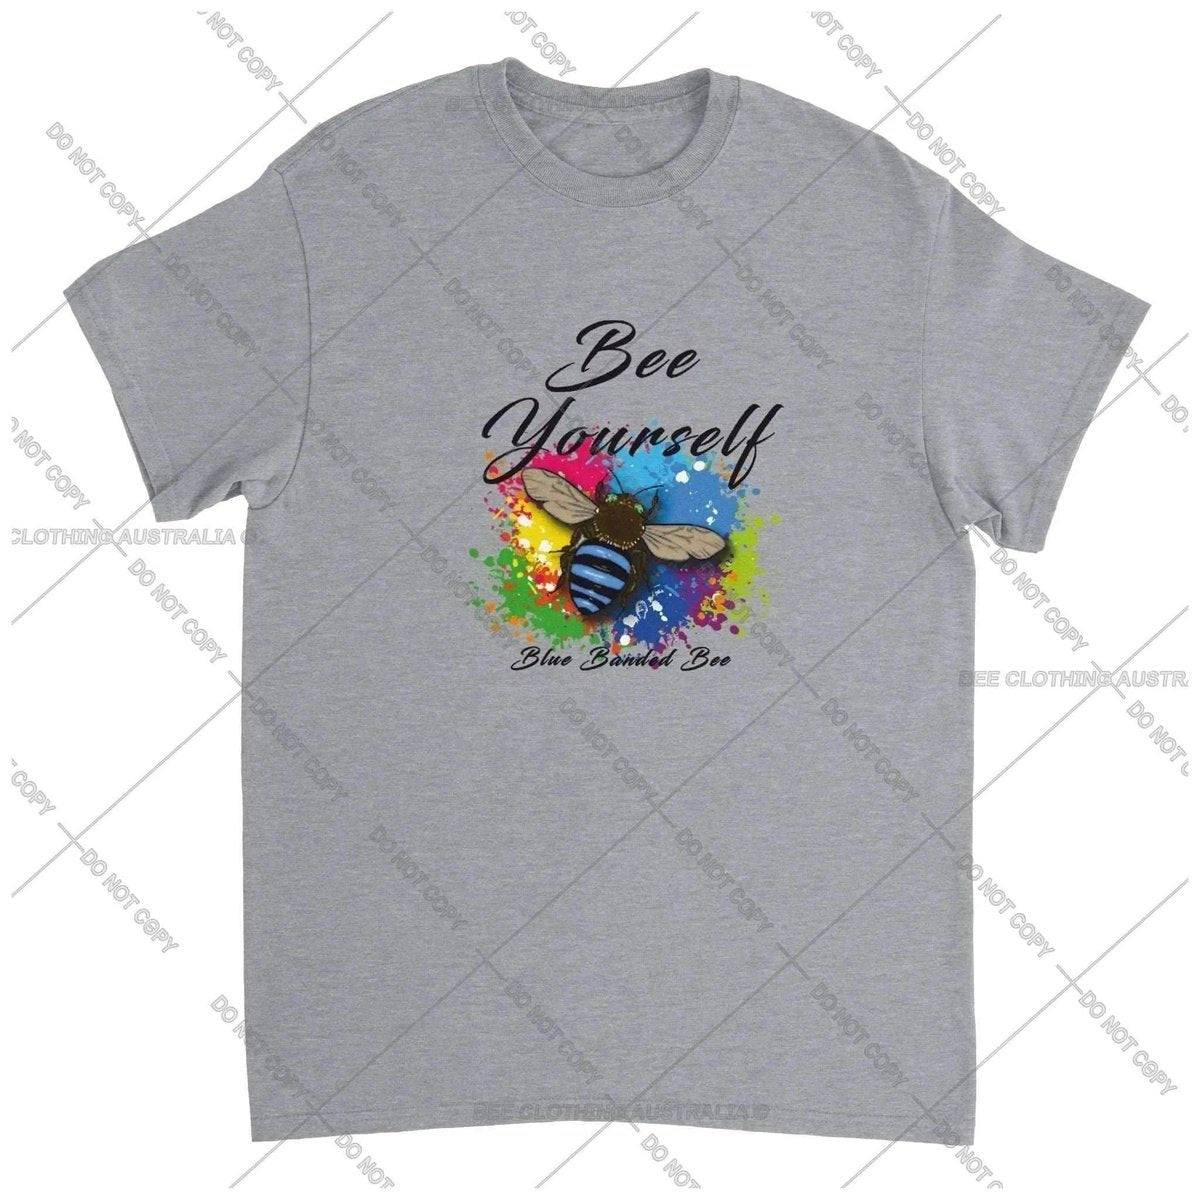 Bee Yourself - Blue Banded Bee - Native Bee T-Shirt Unisex Australia Online Color Sports Grey / S